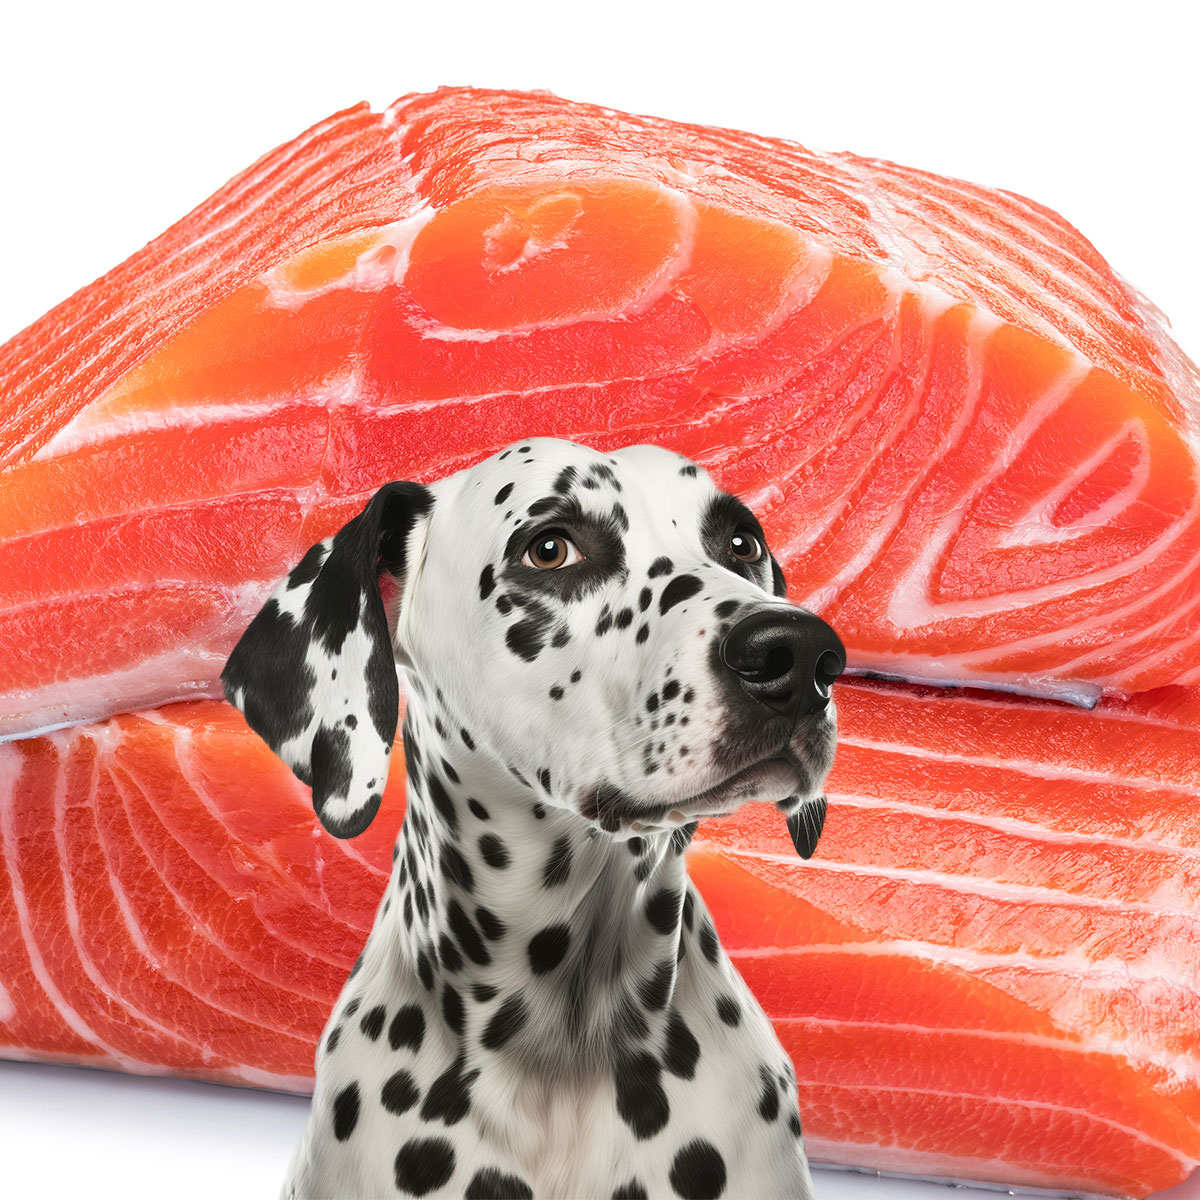 Dalmatian dog in front of salmon.